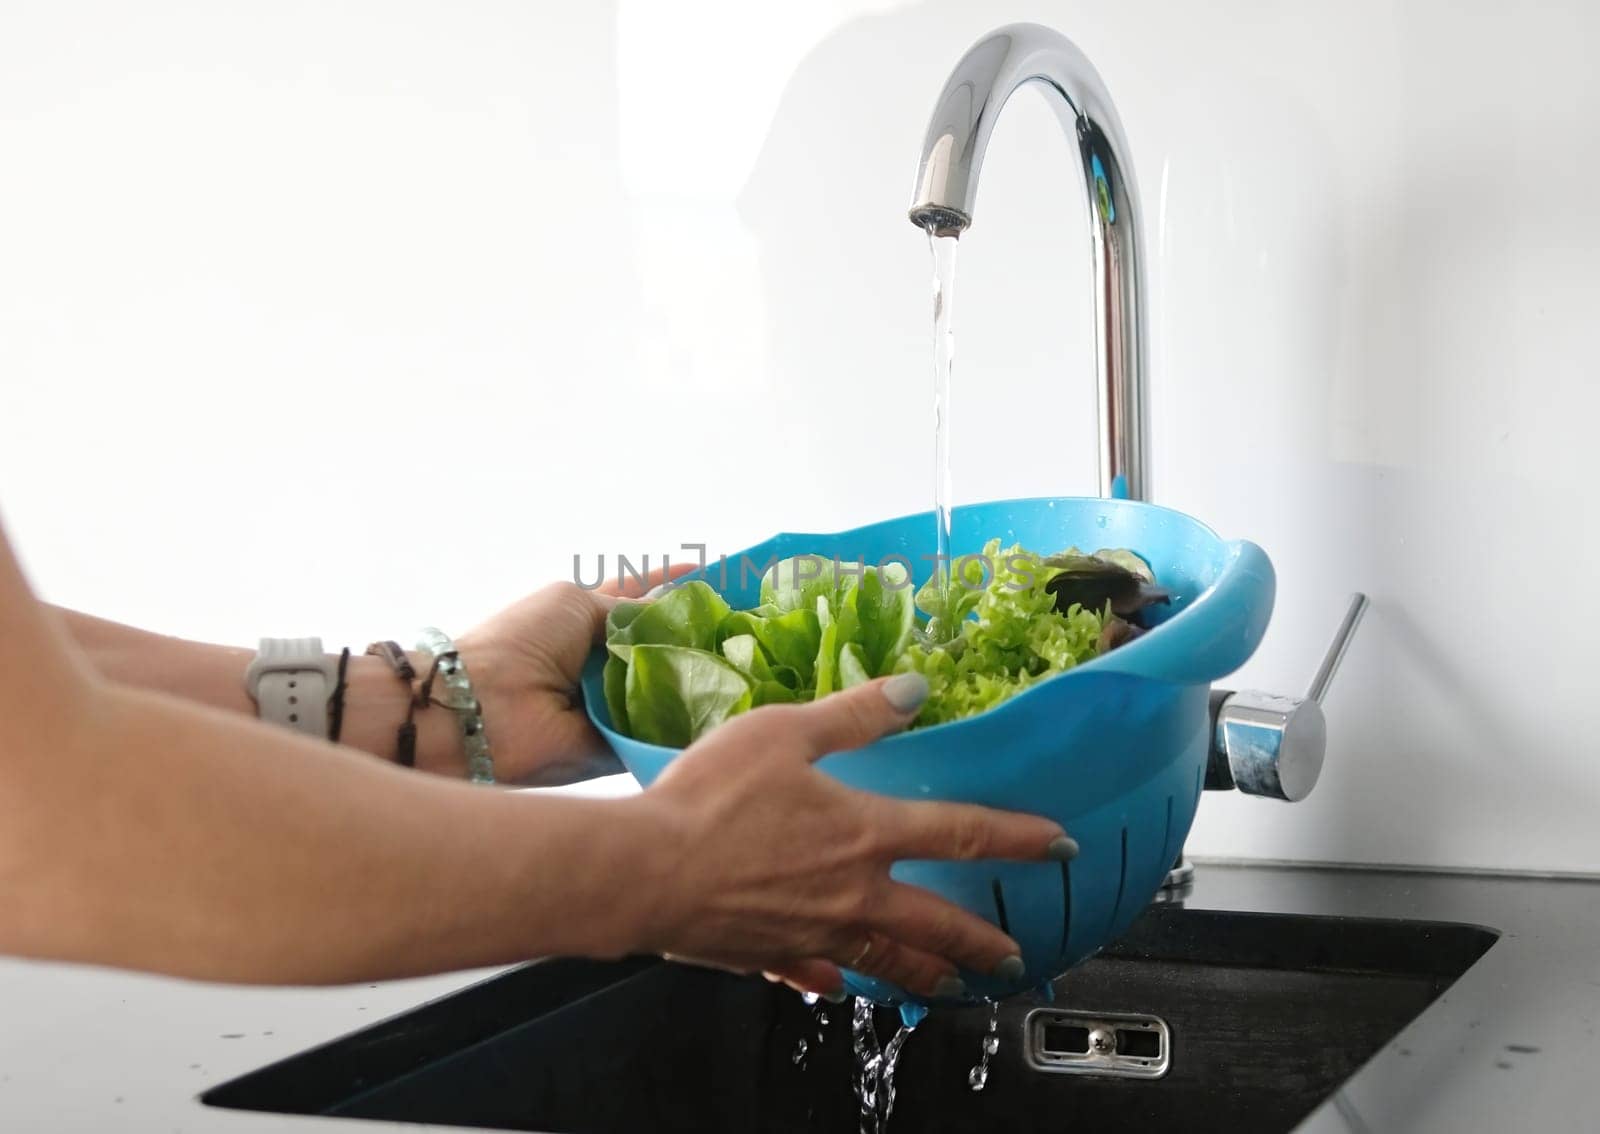 Young Woman In Kitchen Washes Lettuce Leaves In Close-Up View